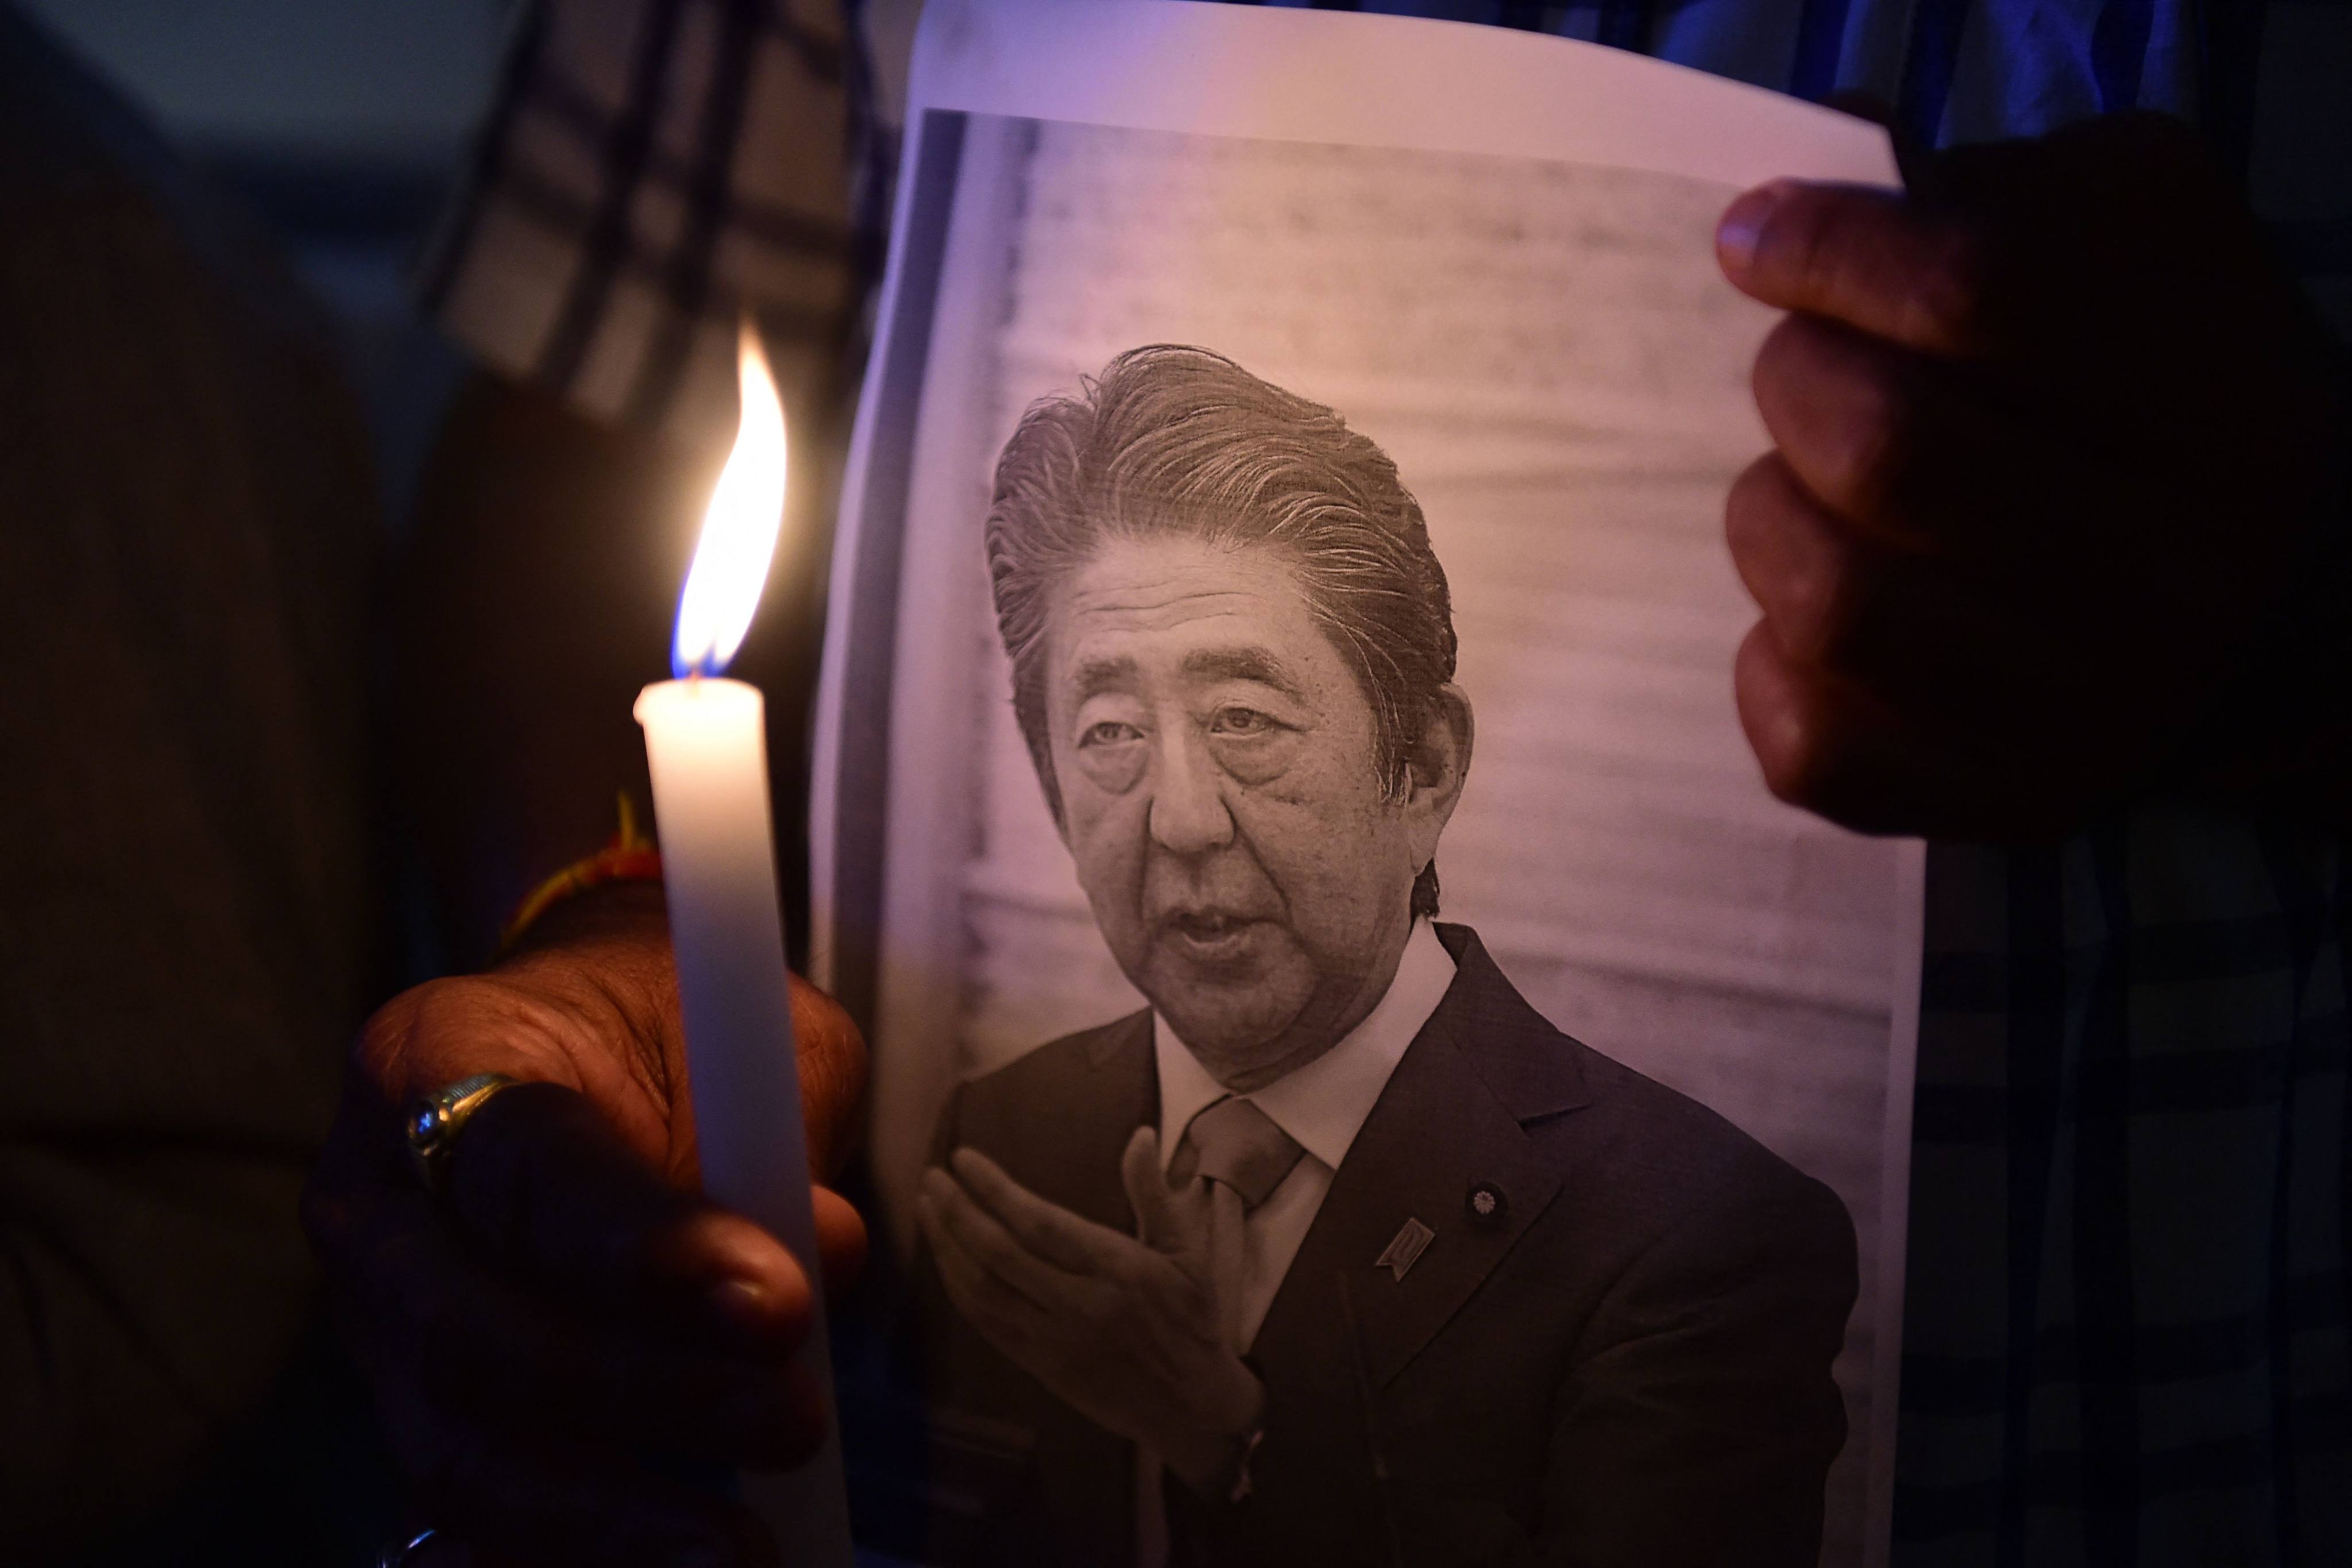 People pay tribute to former Japanese prime minister Shinzo Abe in Ahmedabad, India. File photo: AFP